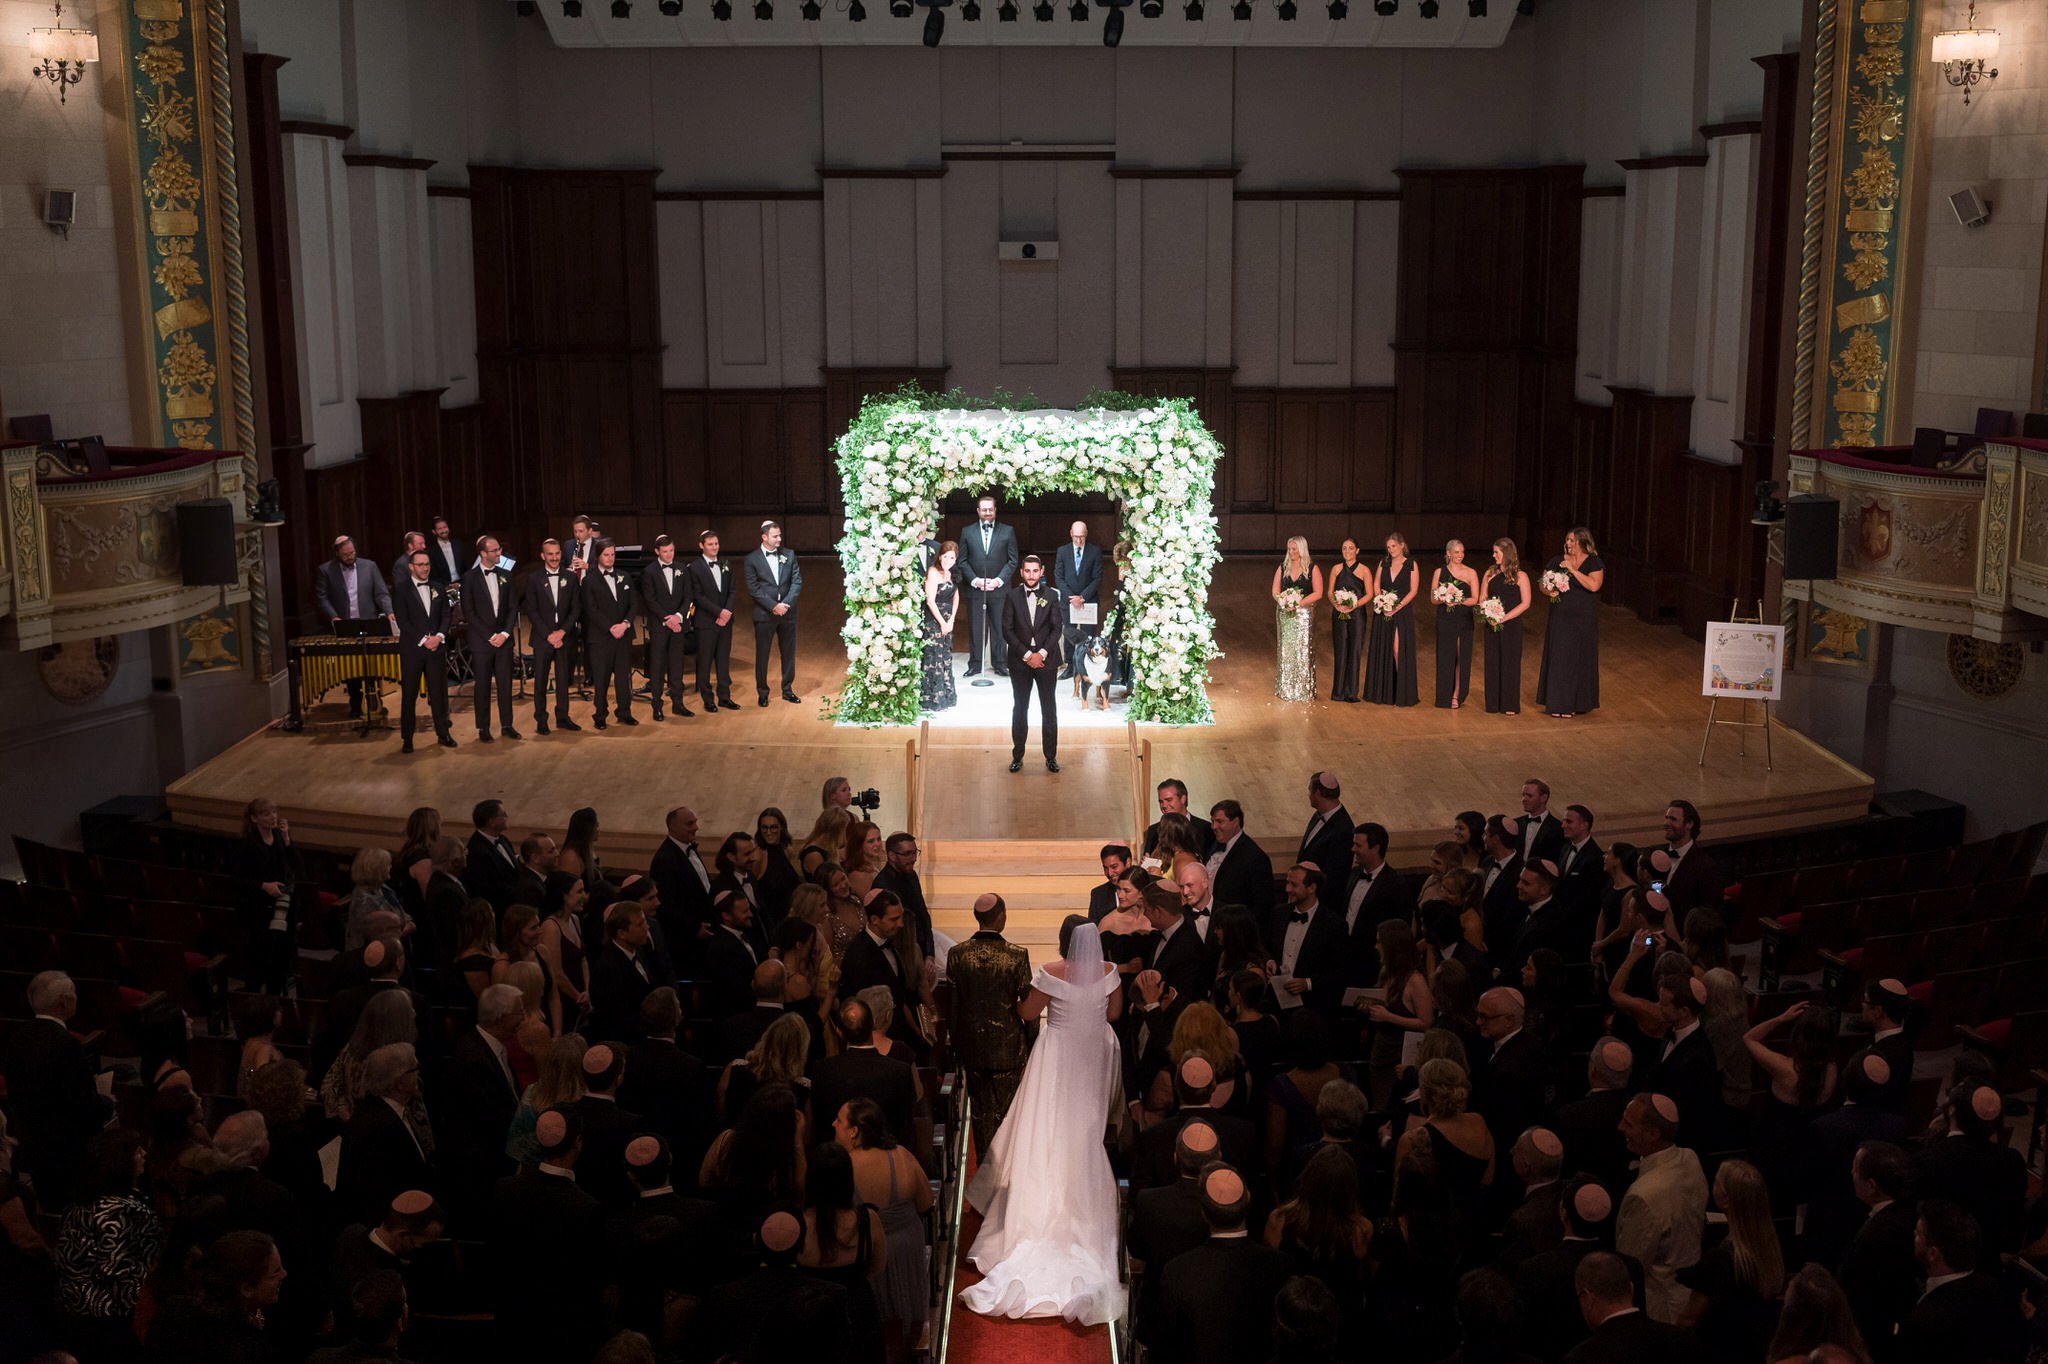 A bride is escorted to her groom, who waits near a white floral chuppah on stage at a Detroit Orchestra Hall wedding.  